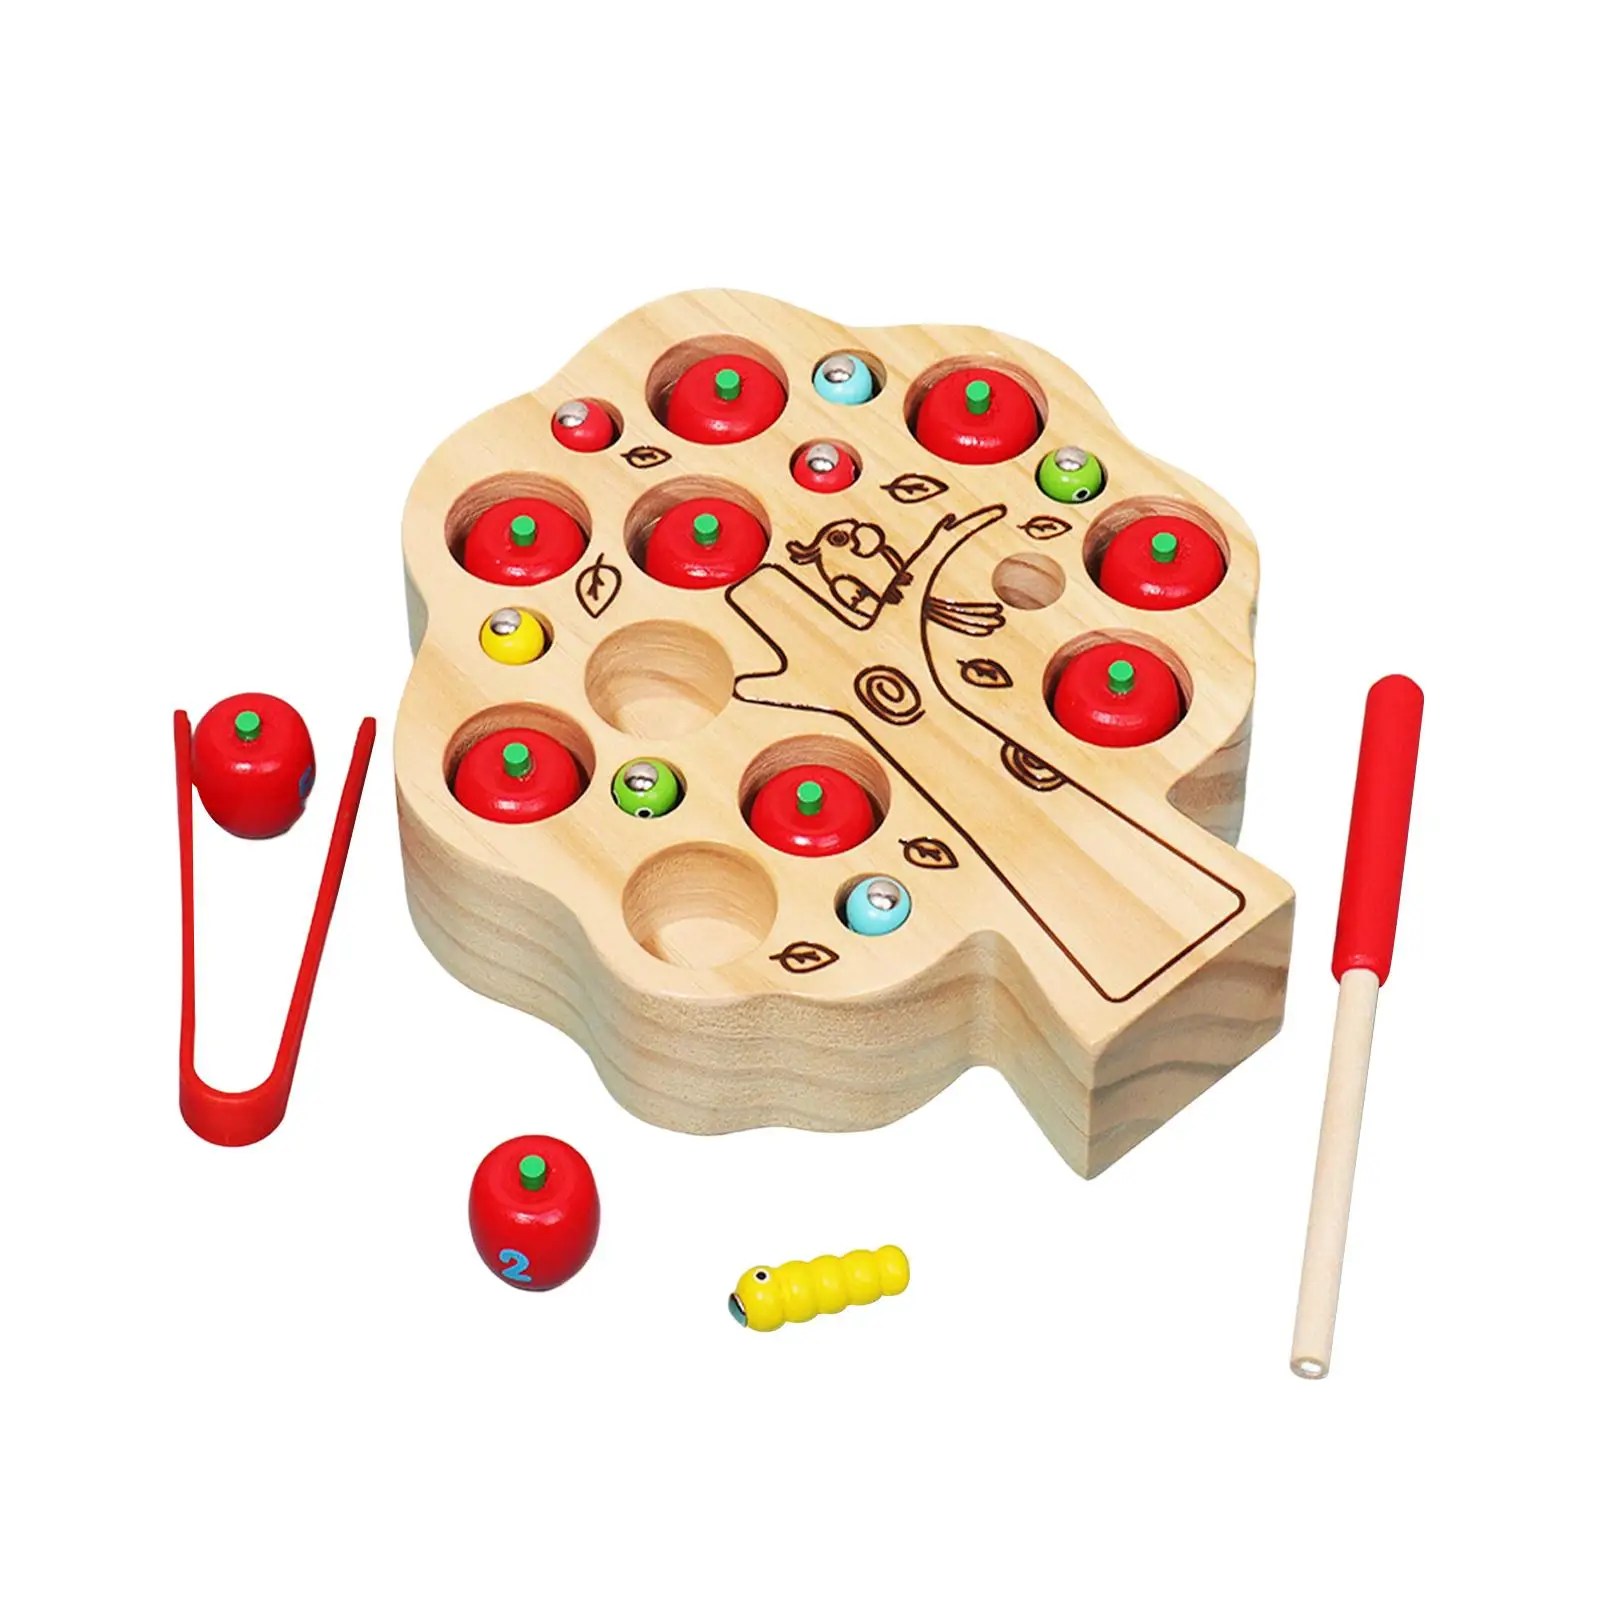 Wood Montessori Color Shape Sorting Puzzle Development Educational Toys Wooden Game Toy for Kids